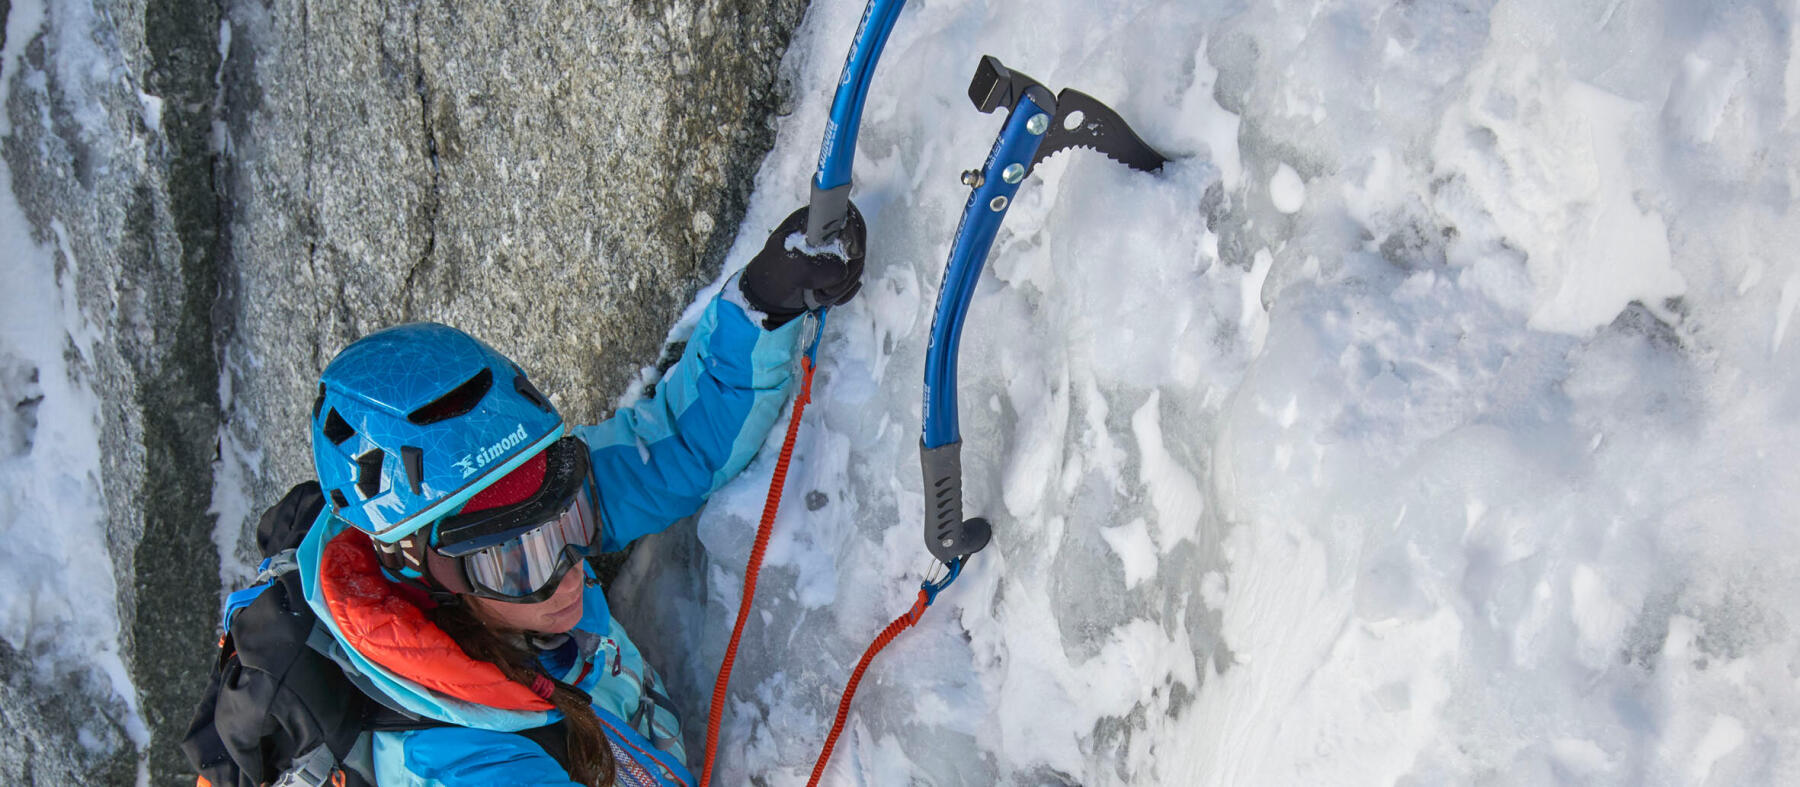 How to choose your ice axe(s)